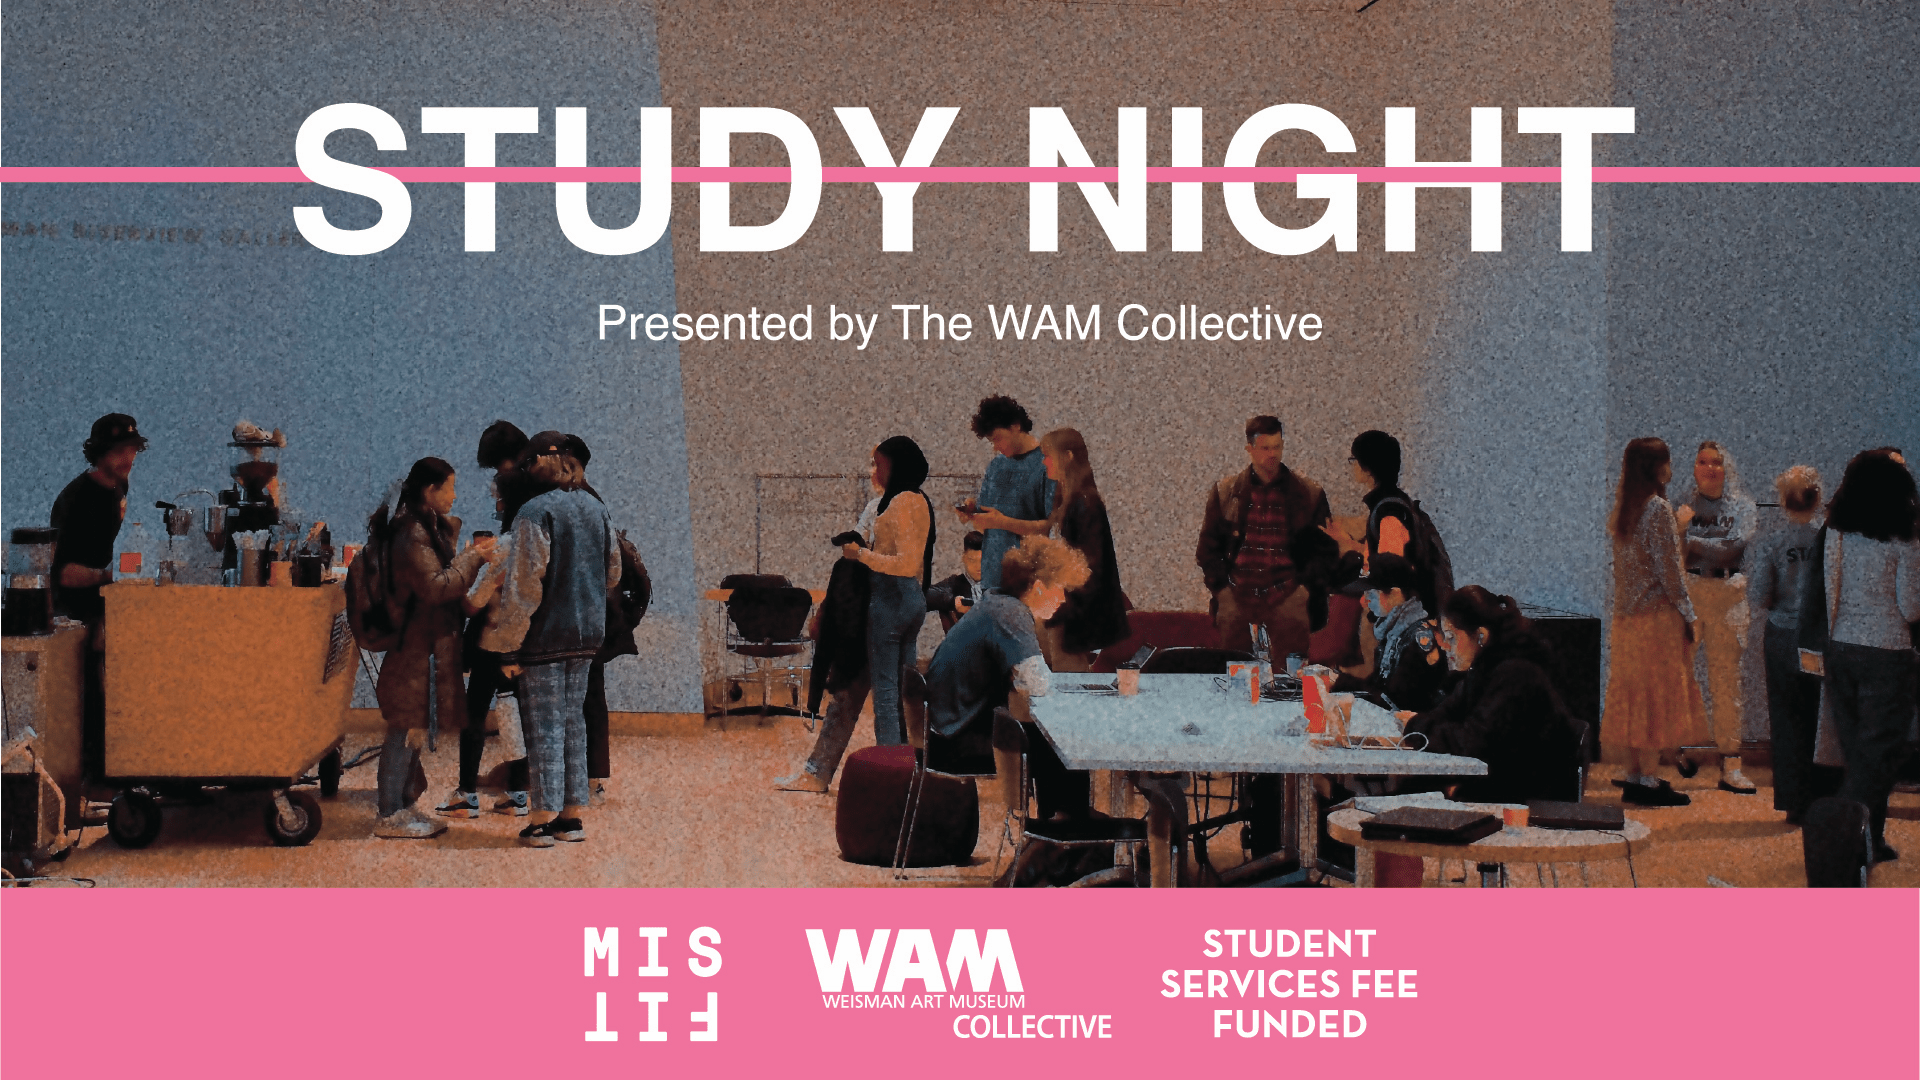 student studying with text "STUDY NIGHT presented by The WAM Collective"